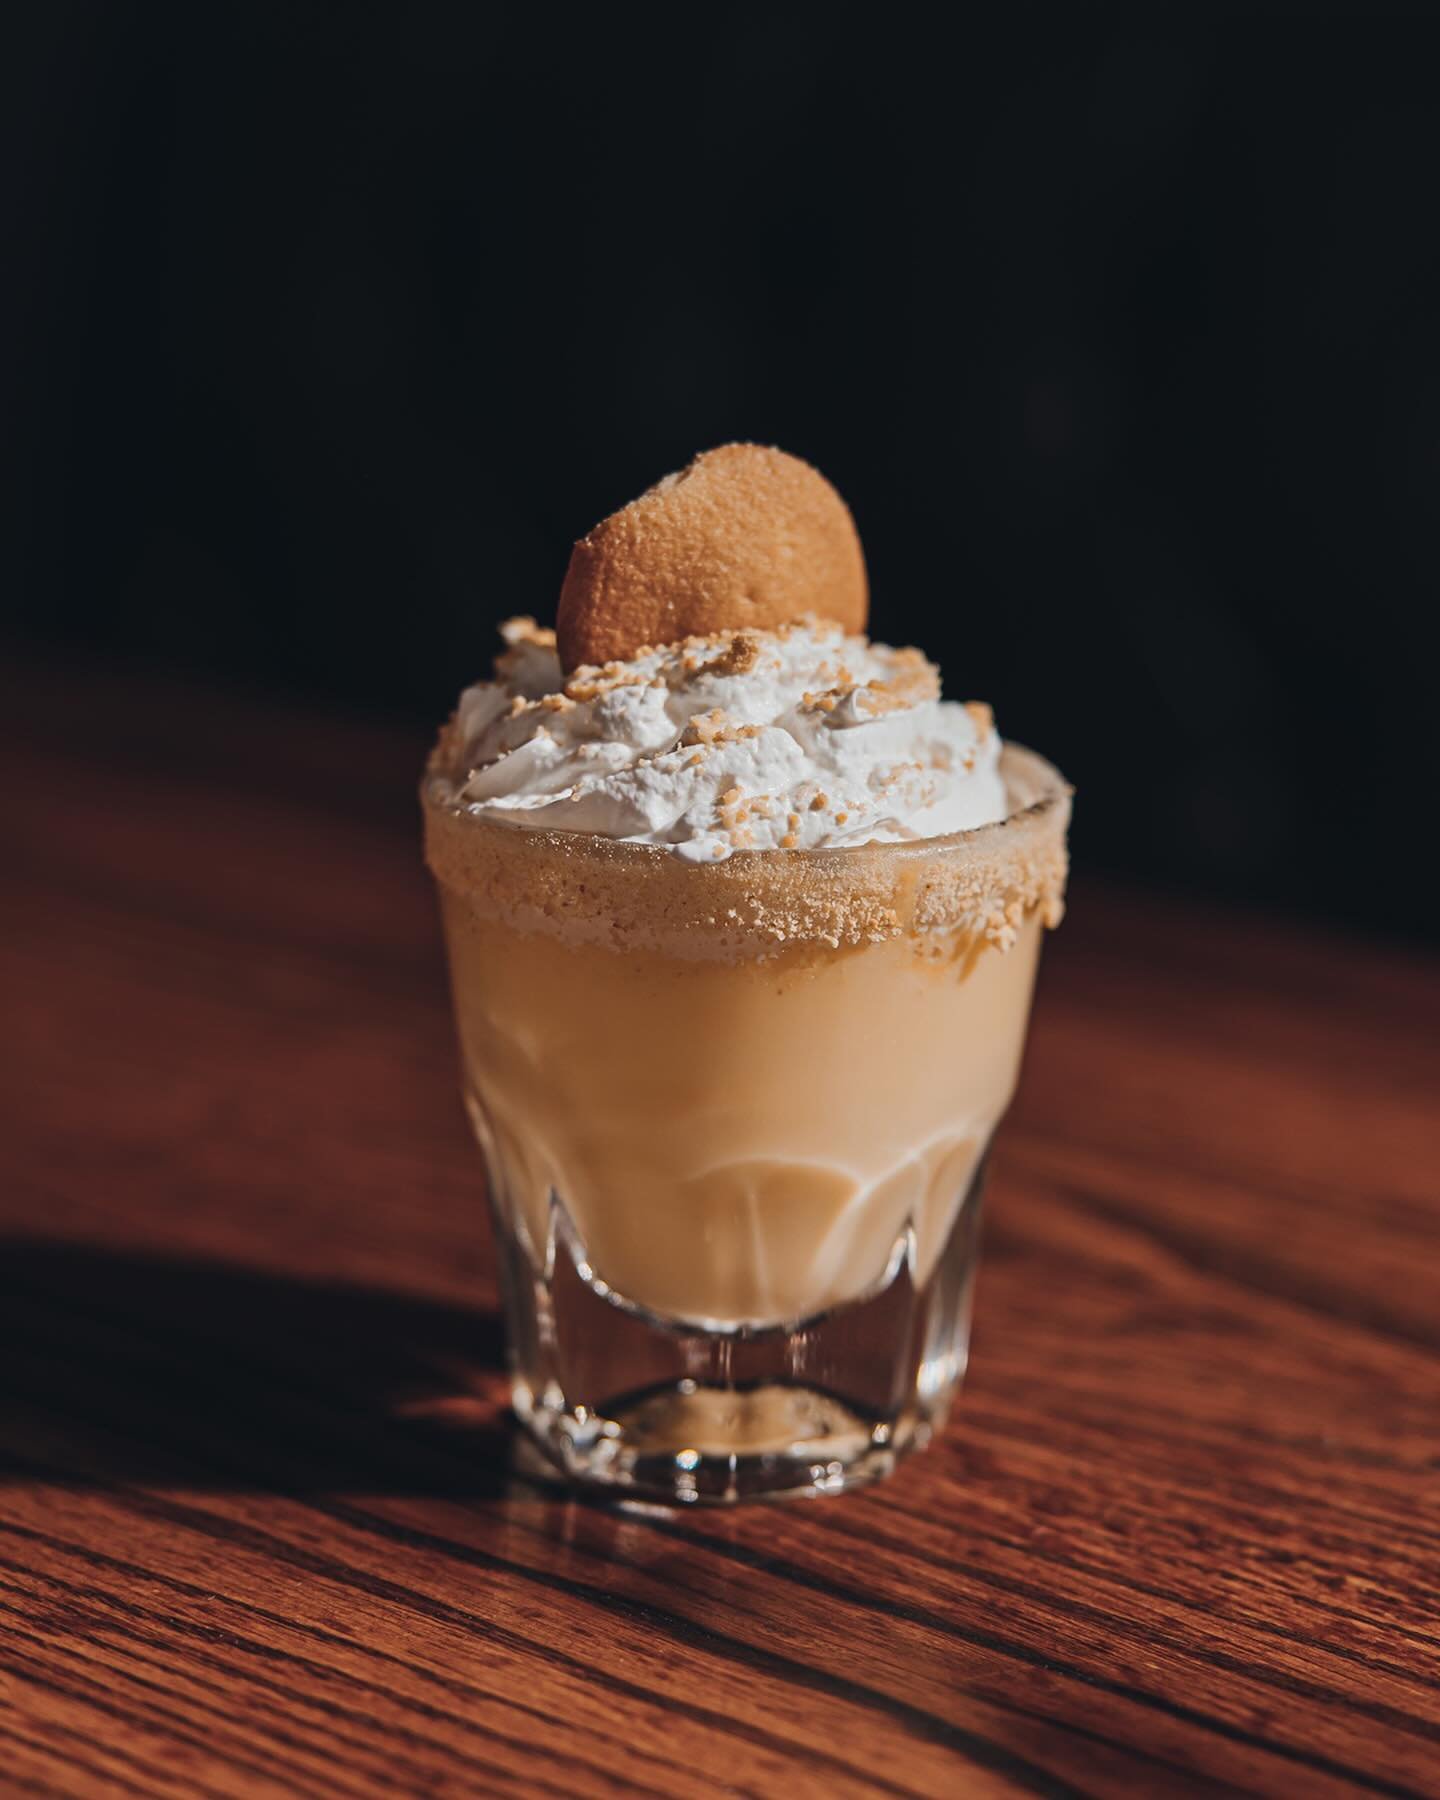 Mothers Day special: dessert #2

Pudding shot (booze optional)

Join us this weekend and treat your Mom! She&rsquo;s had to put up with you since day one.

. 
.
.
#odearbar #odearbarportland #odearbarandgrill #pdxmothersday #mothersday #mothersdayspe